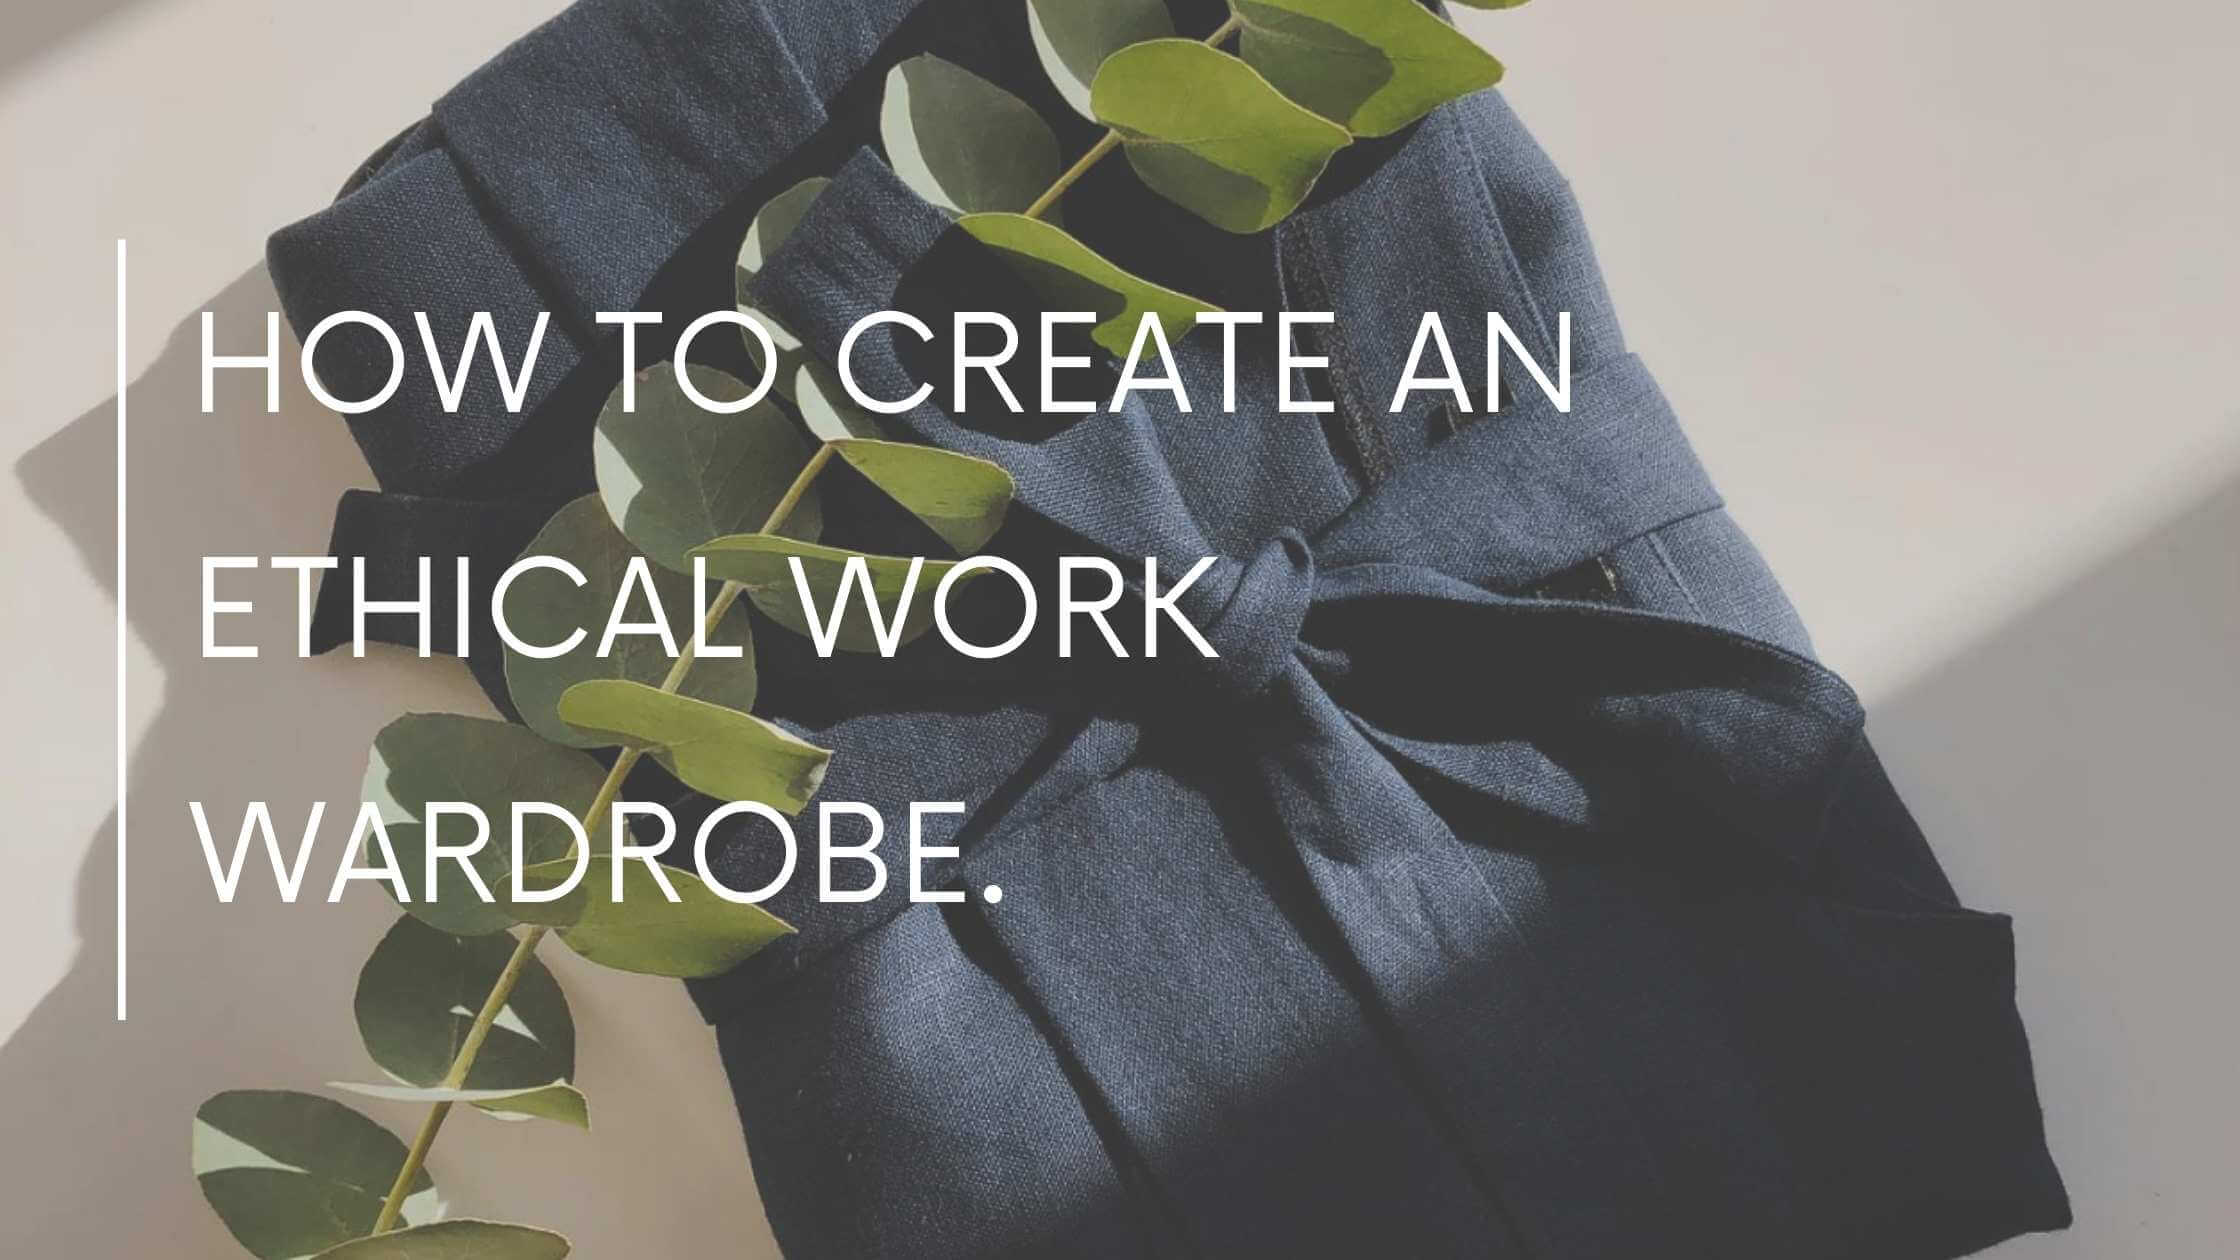 How To Create An Ethical Work Wardrobe.